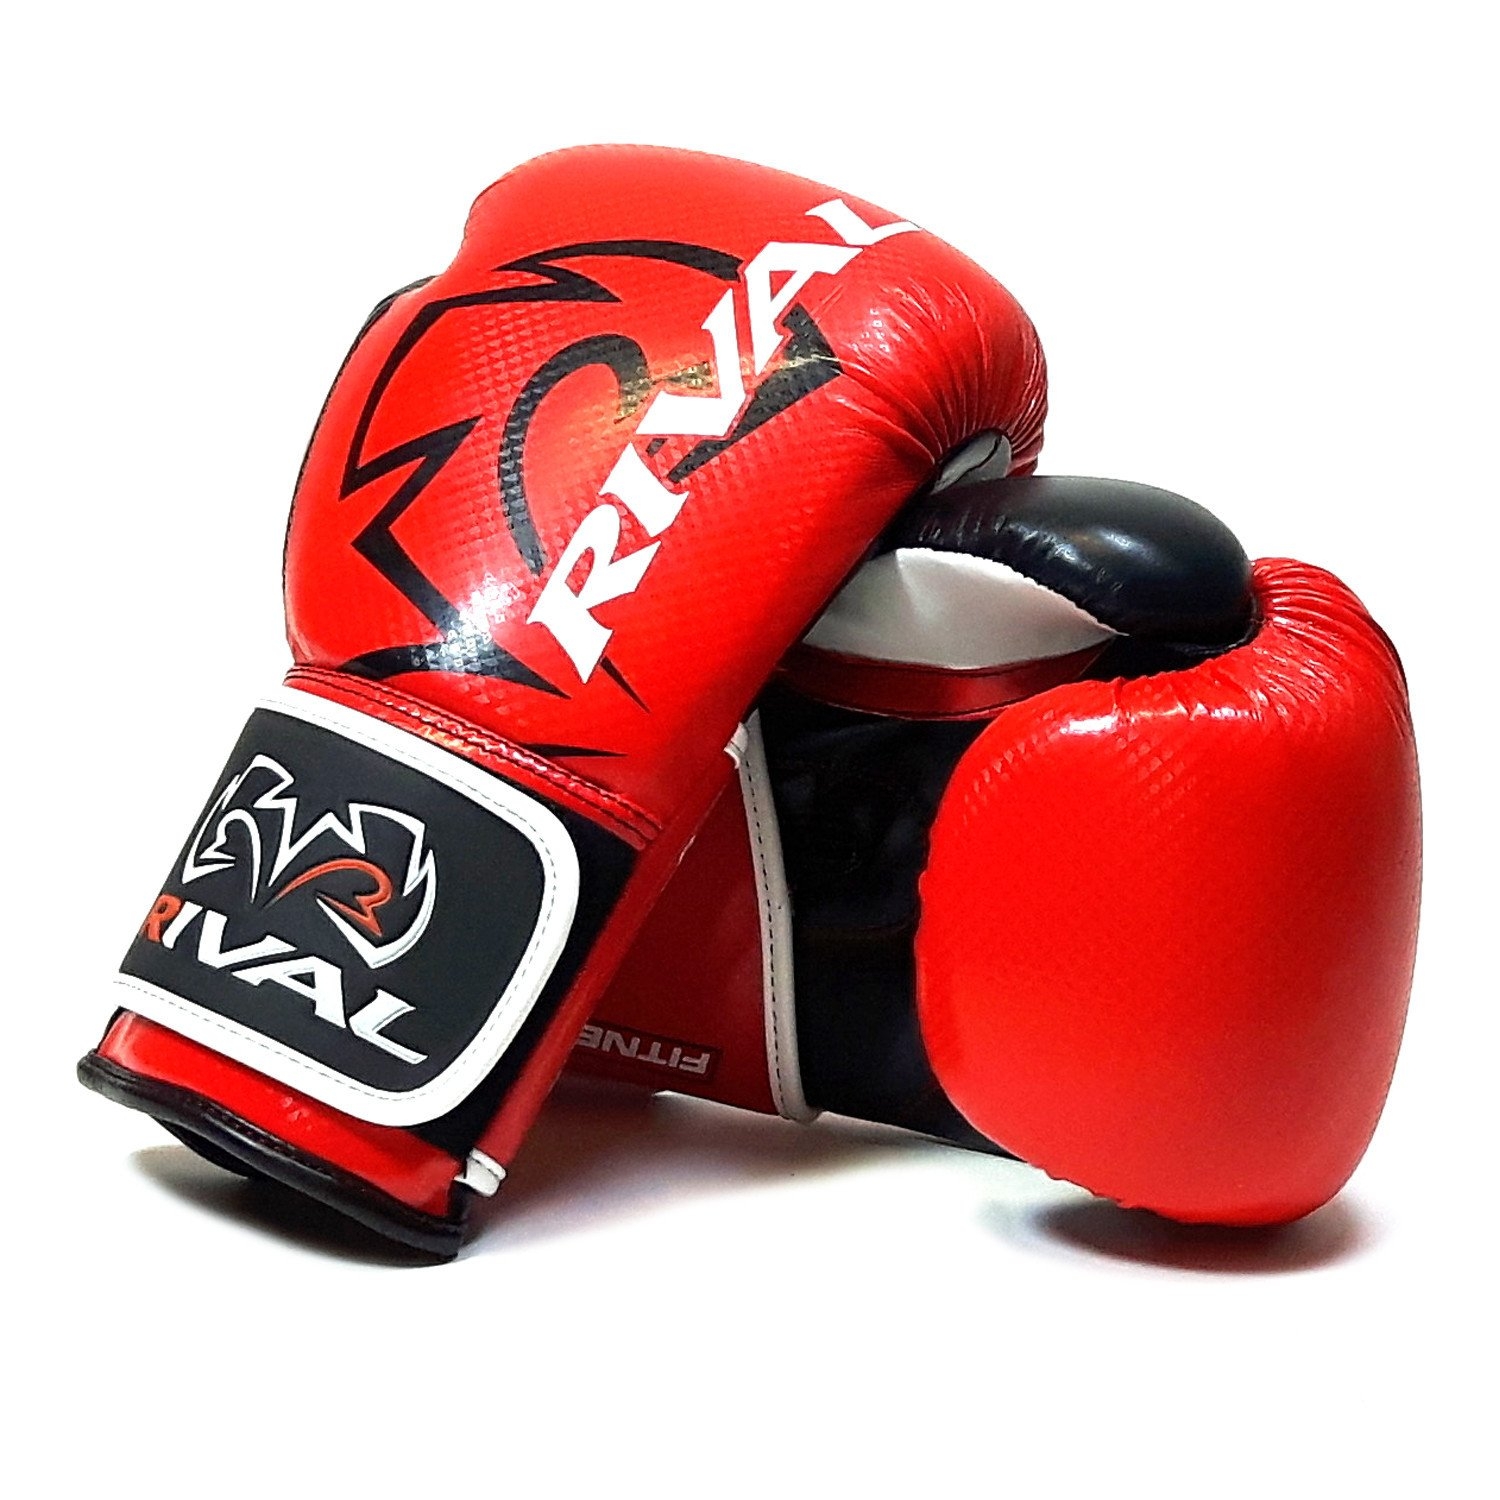 Rival Rb7 Fitness Bag Training Boxing Gloves Red Black  – Size: 12 – Adult – Unisex